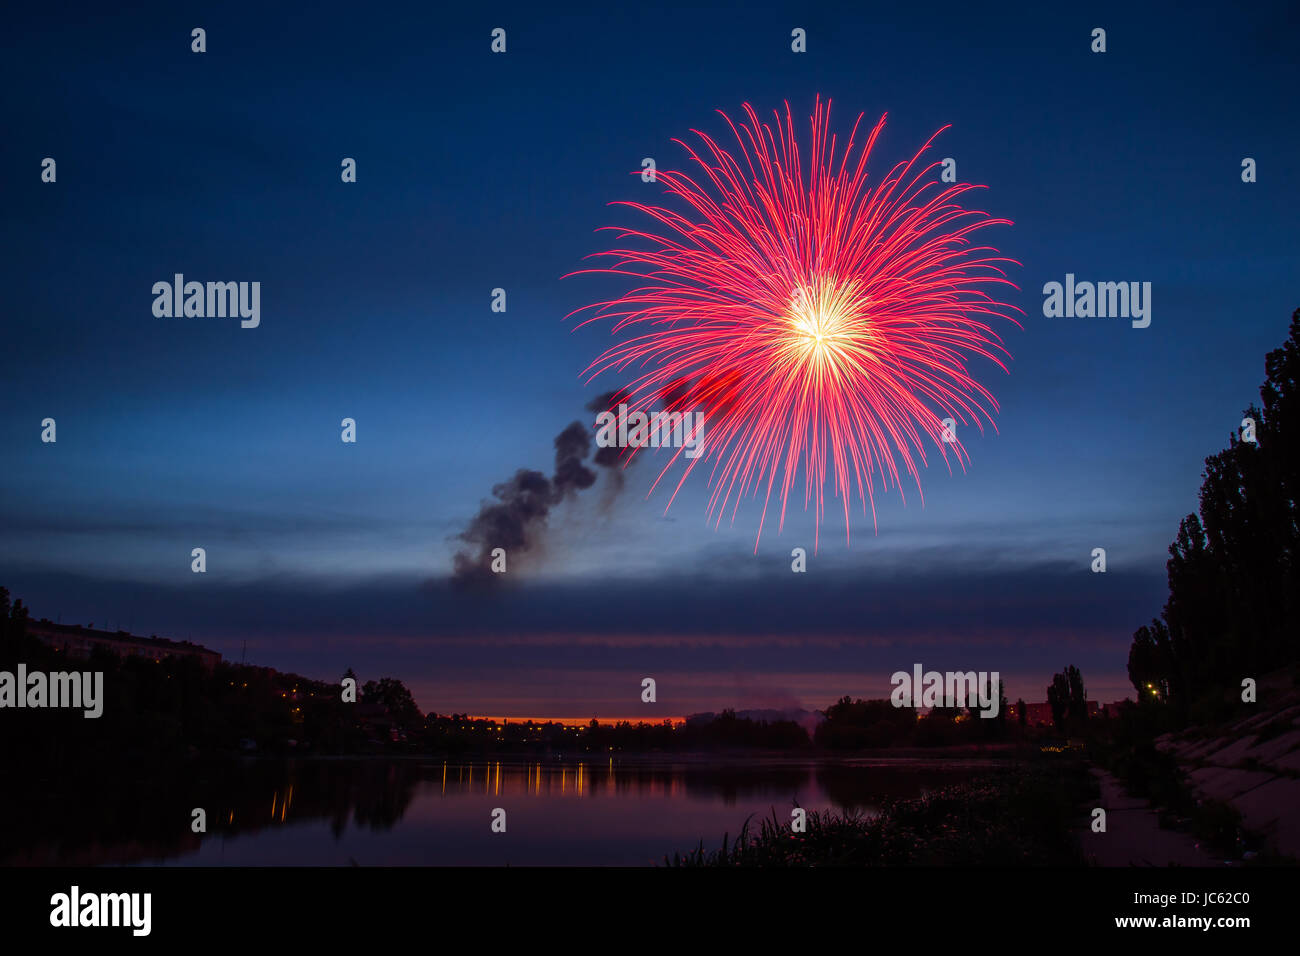 Fireworks Over Lake at Night Stock Photo